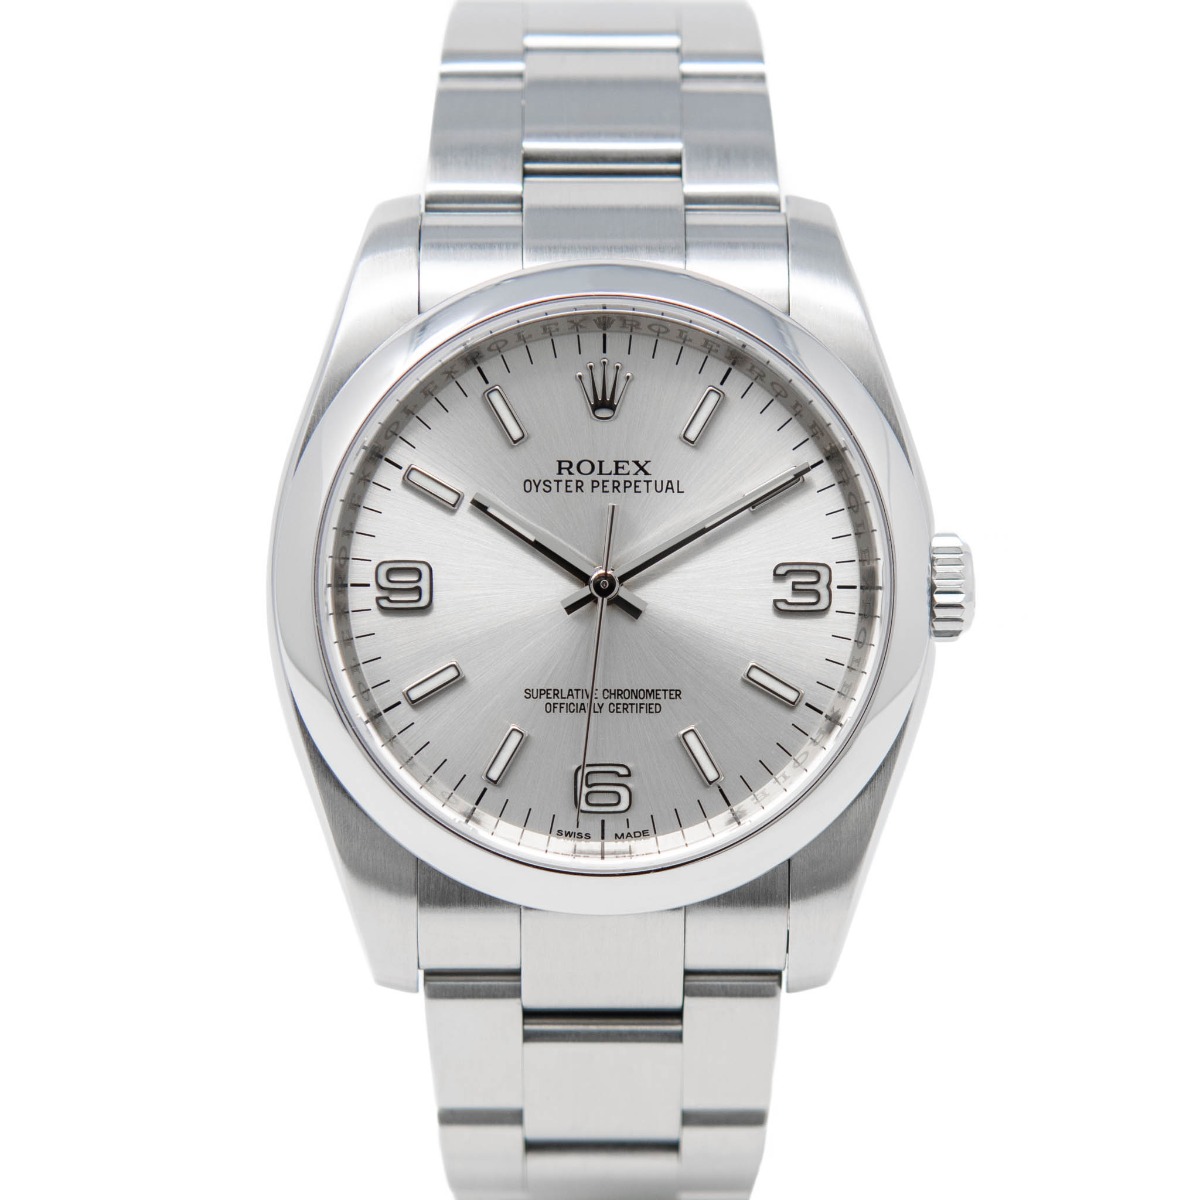 Rolex Oyster Perpetual 36 Stainless Steel 116000 Wristwatch - Silver ...